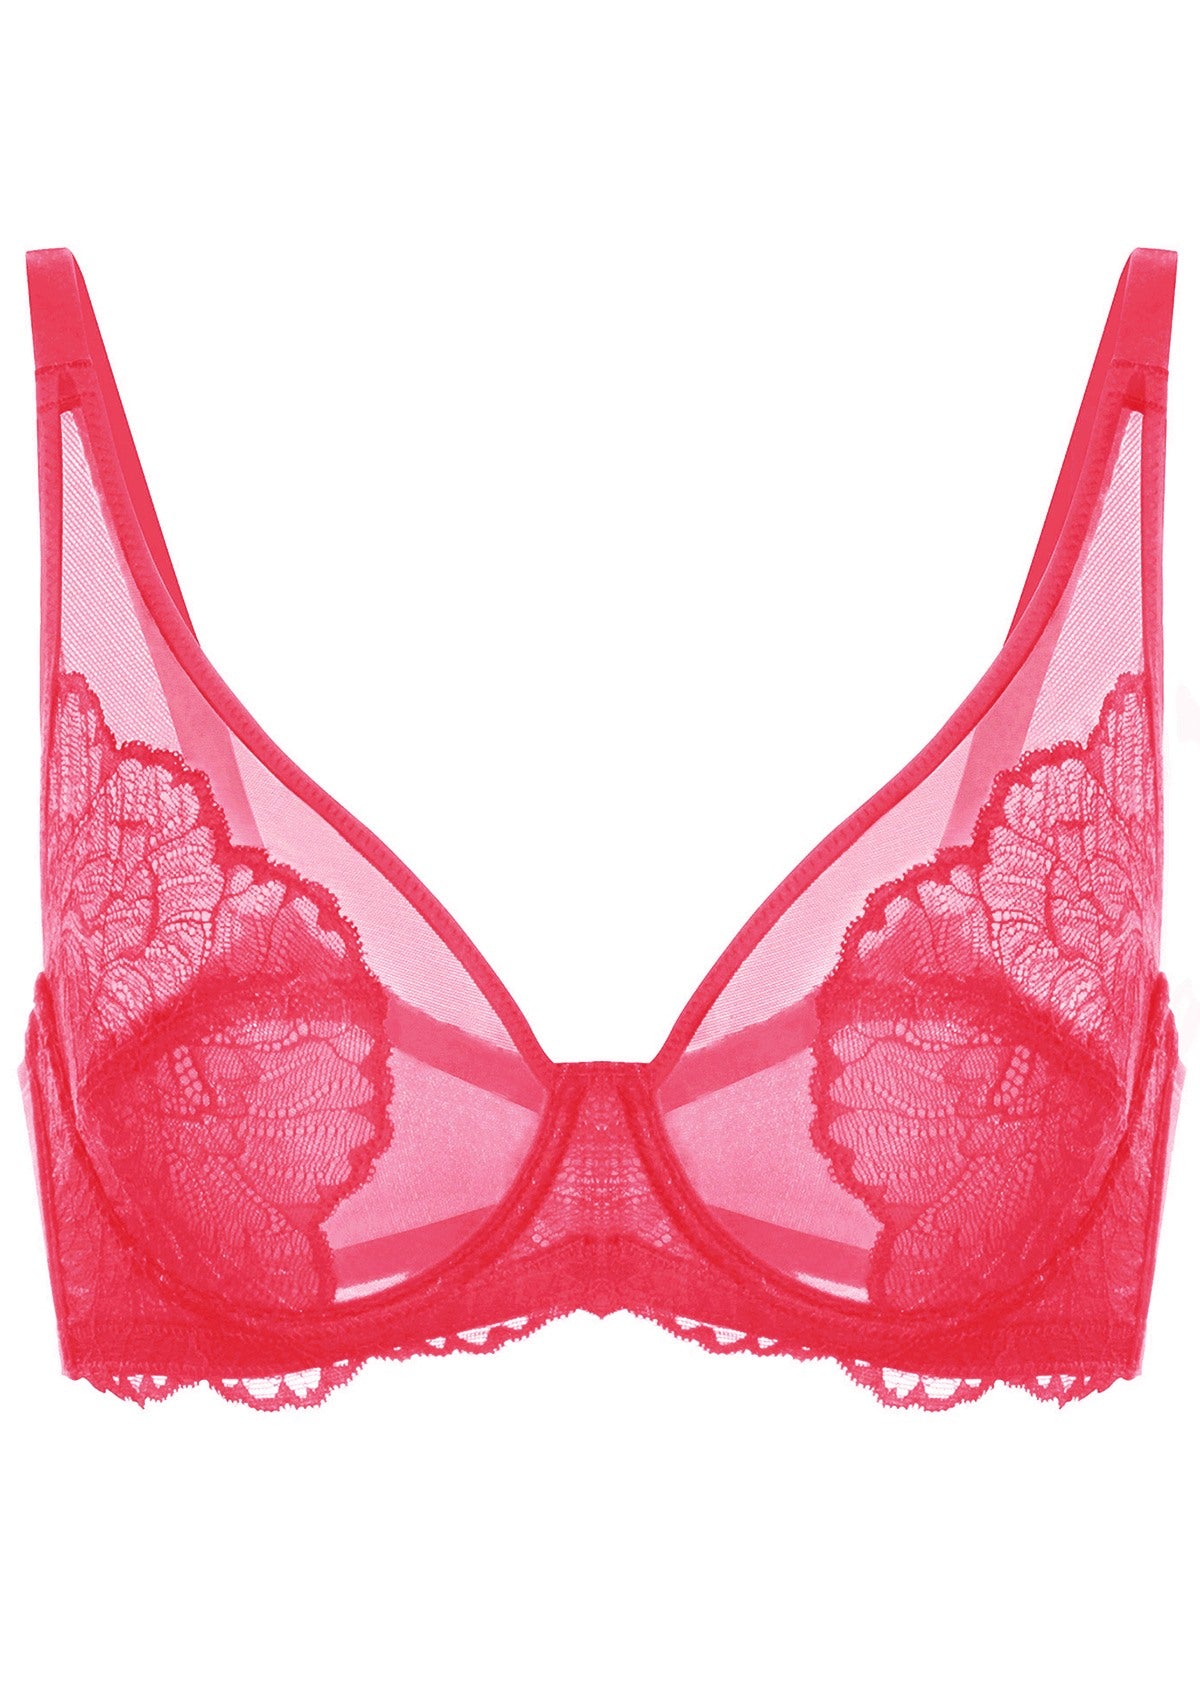 HSIA Blossom Unlined Lace Underwire Bra - Burgundy / 36 / D